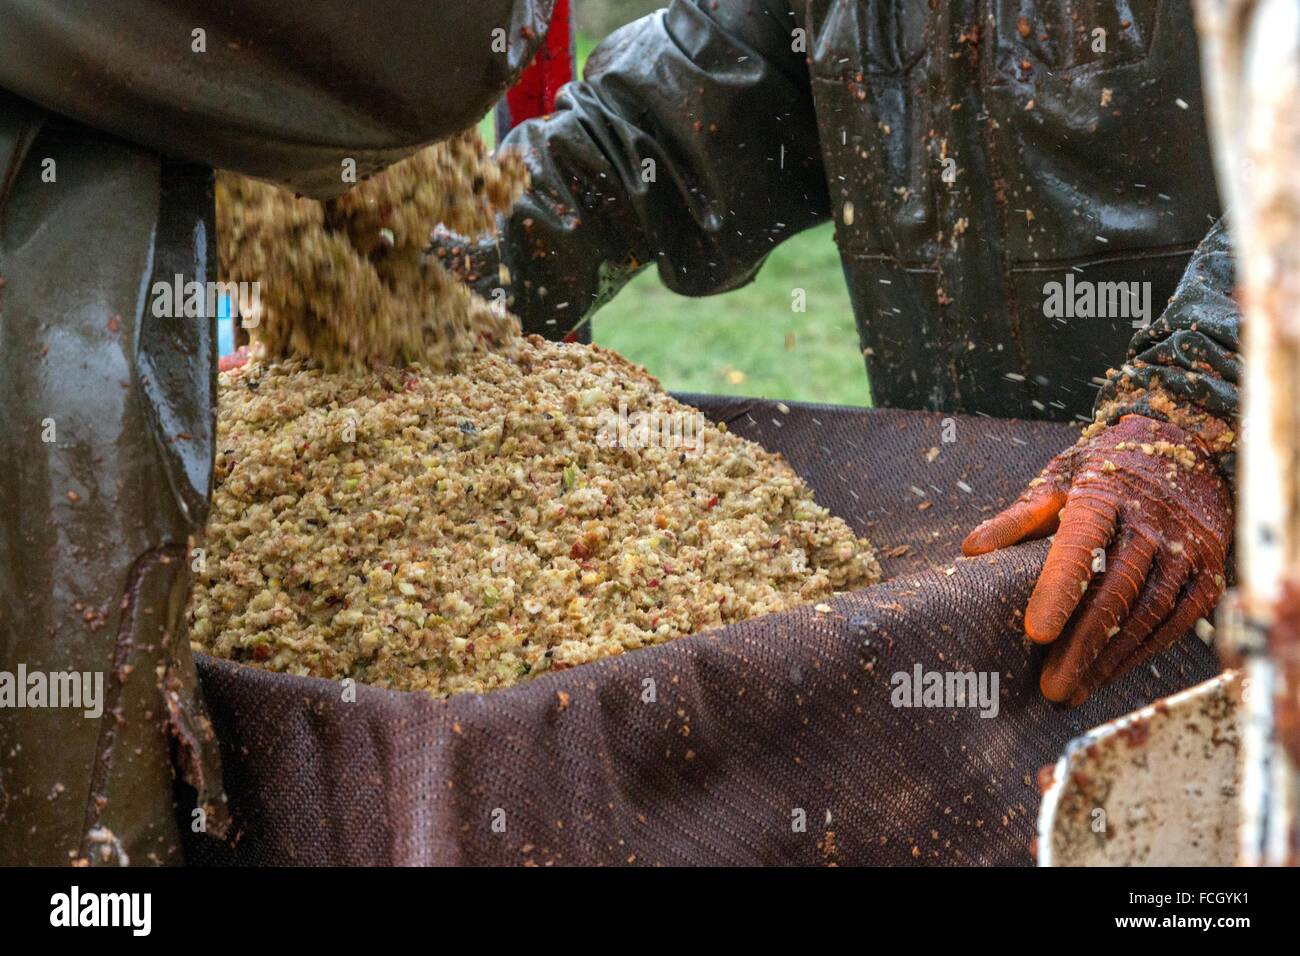 FILLING BURLAP BAGS WITH CRUSHED CIDER APPLES BEFORE PRESSING, THE MAKING OF FARM CIDER, CLAUDE COURBE'S FARM, RUGLES (27), FRAN Stock Photo